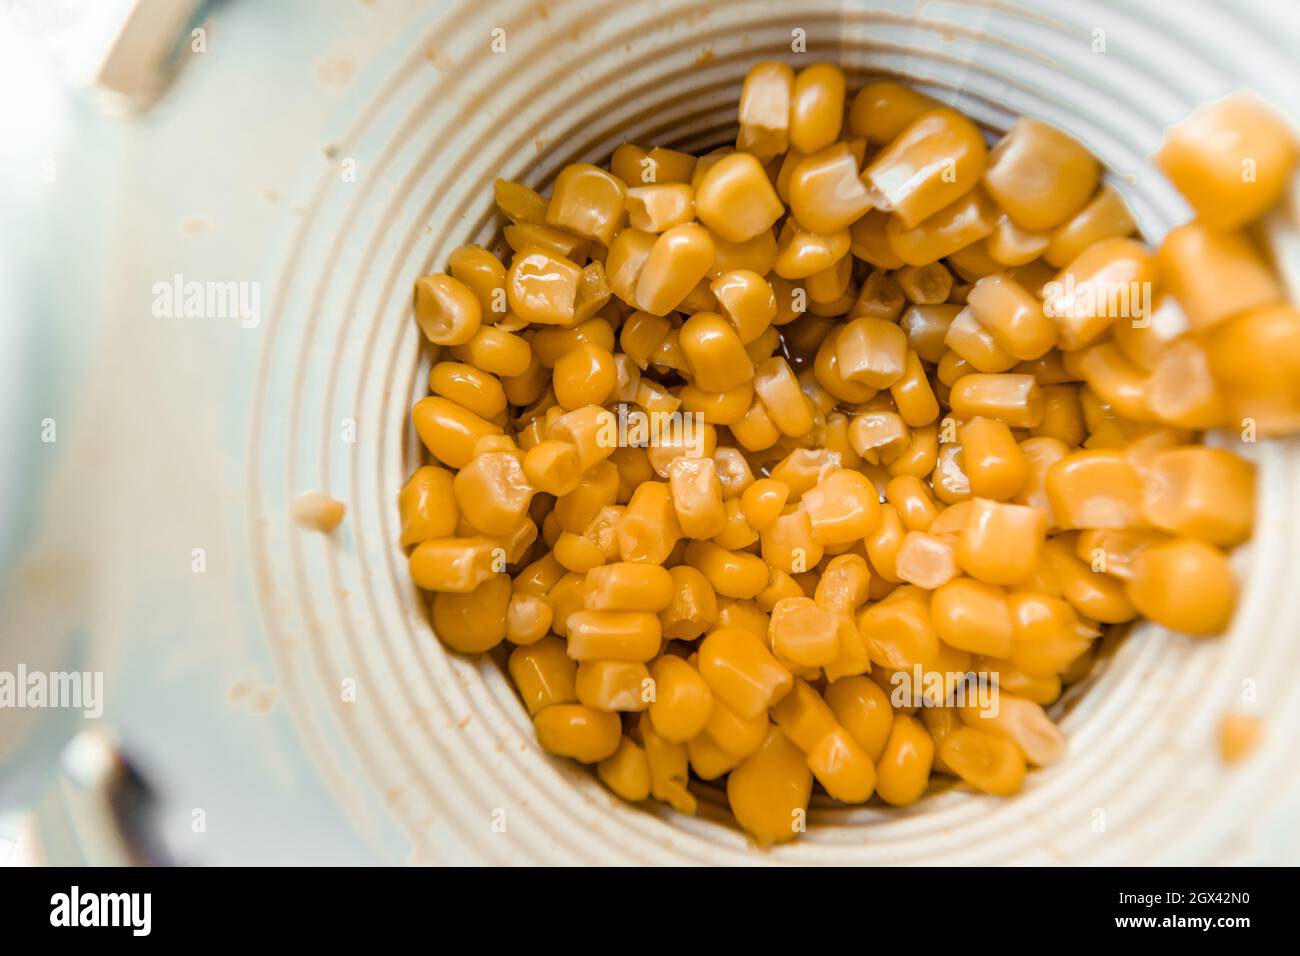 Lots of canned corn in an aluminum can. Close-up top view. Stock Photo